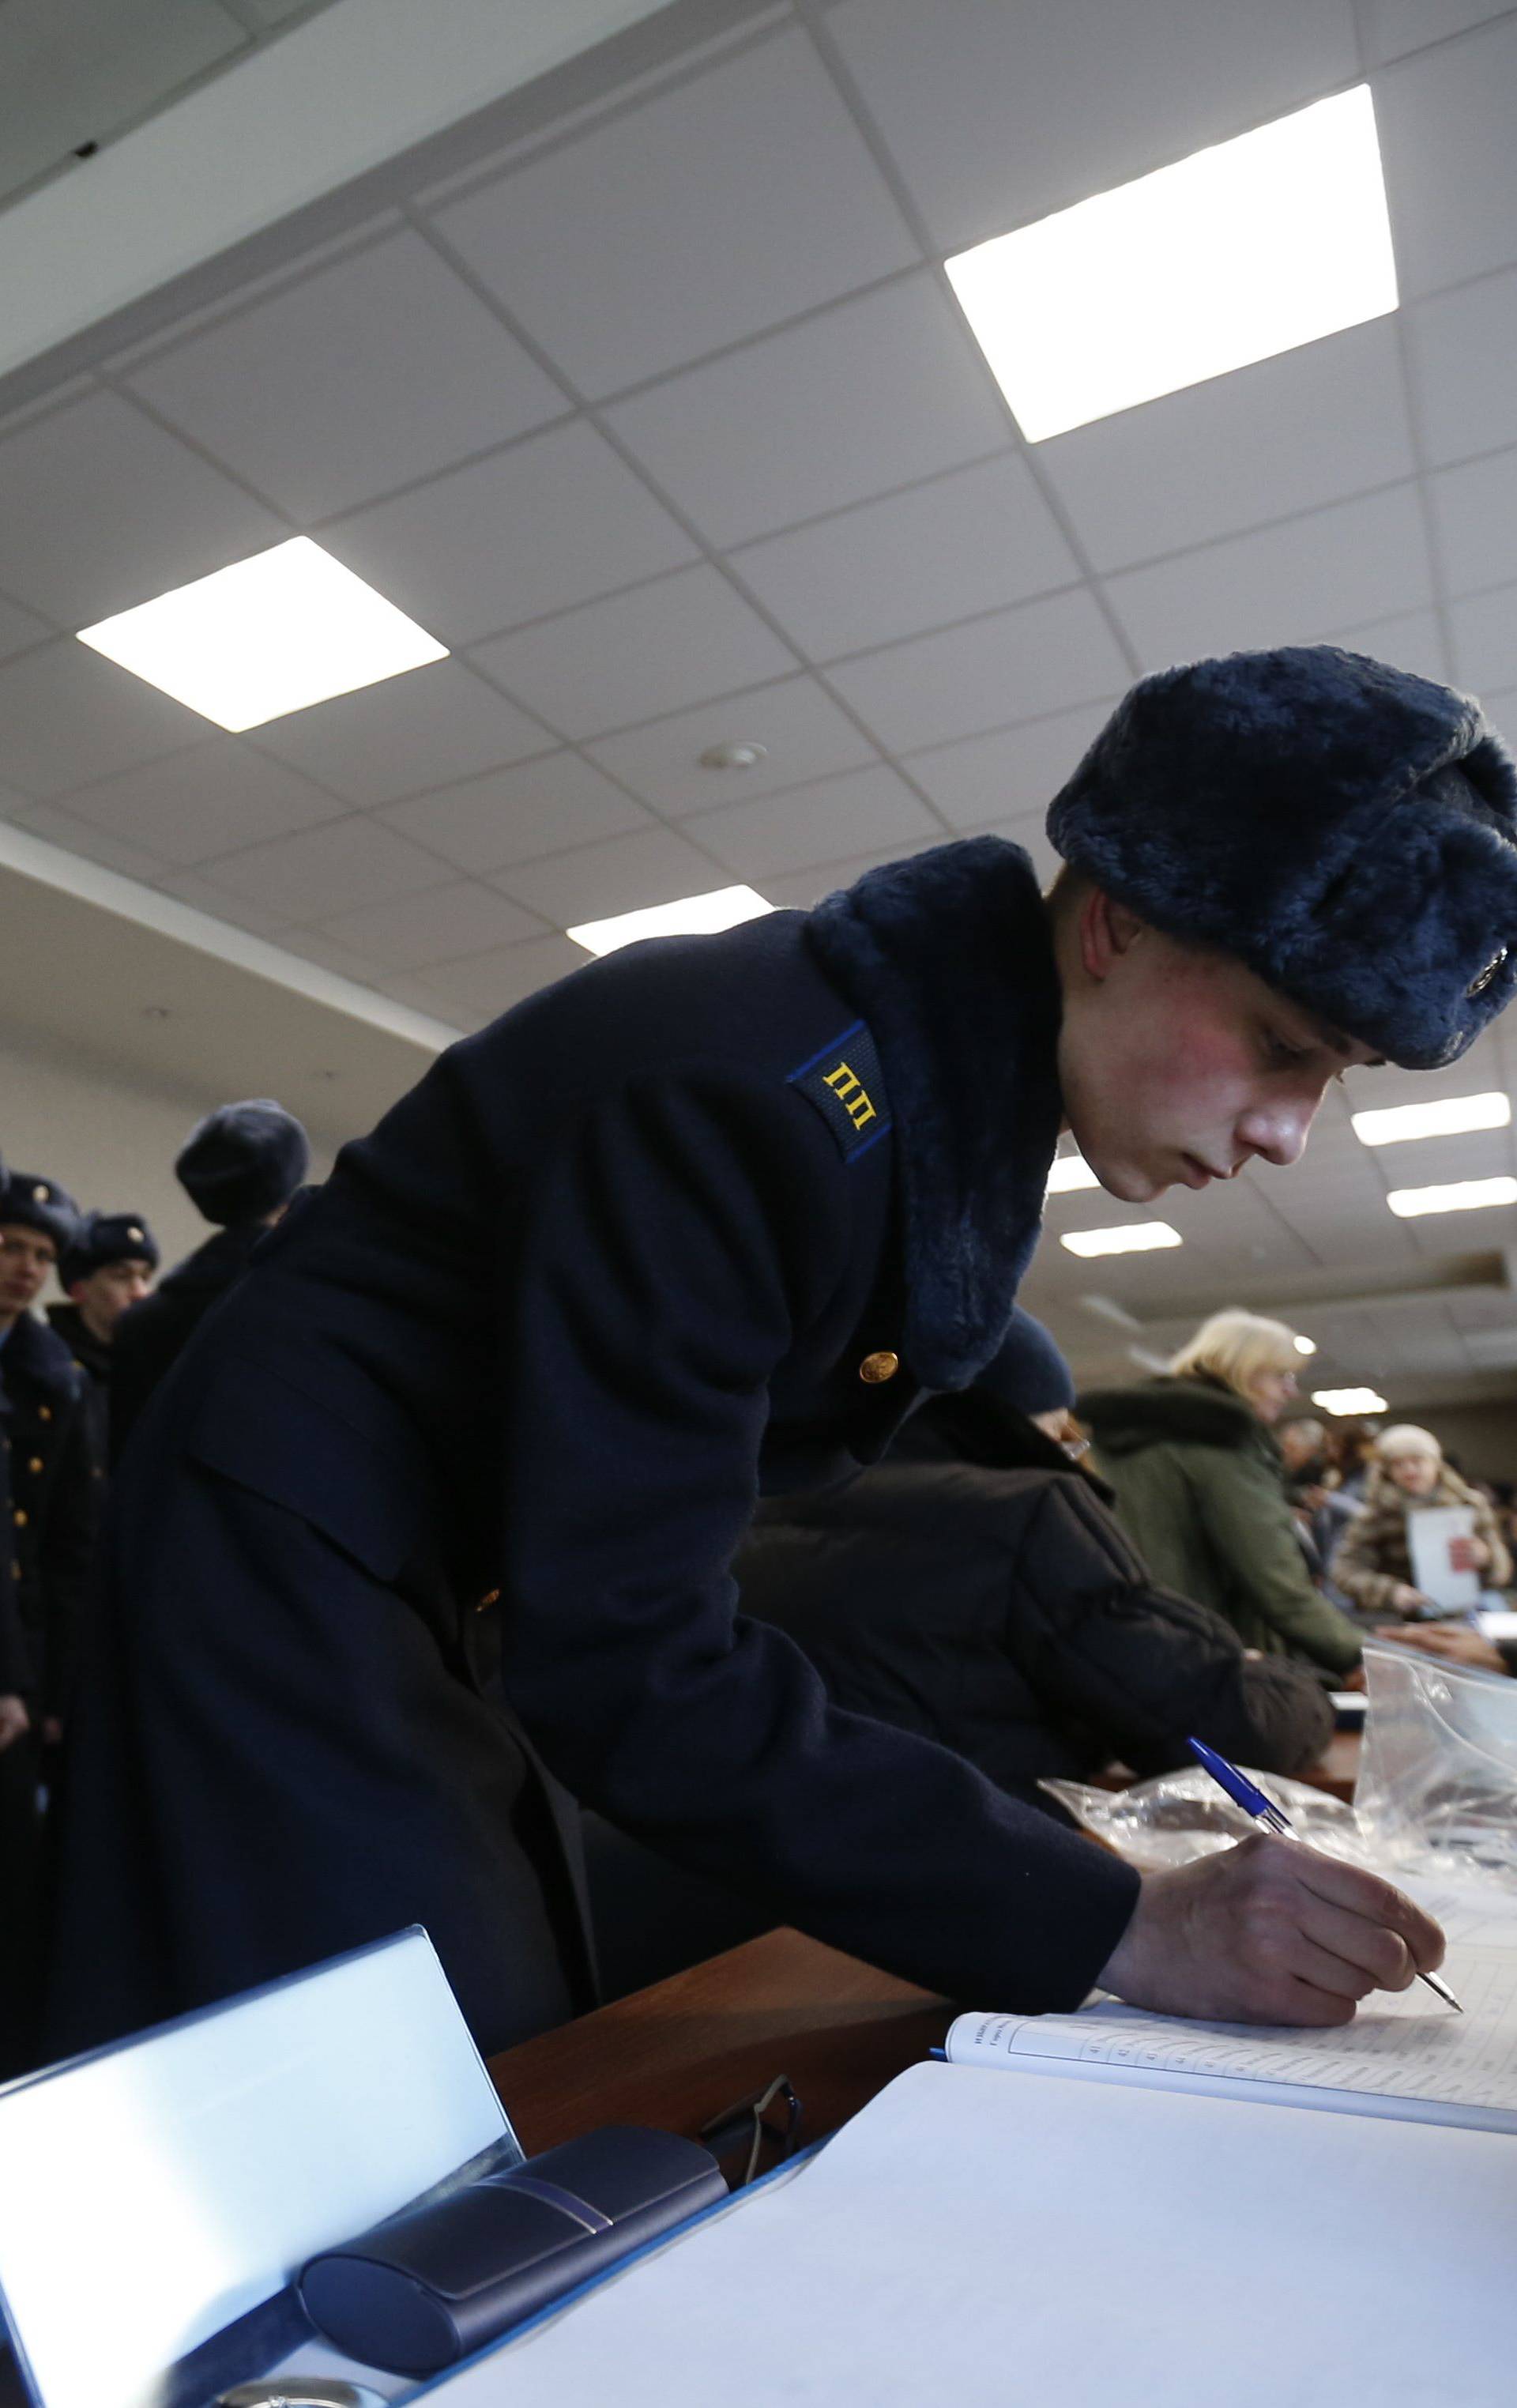 Servicemen of the Presidential Regiment visit a polling station to cast their votes during the presidential election in Moscow